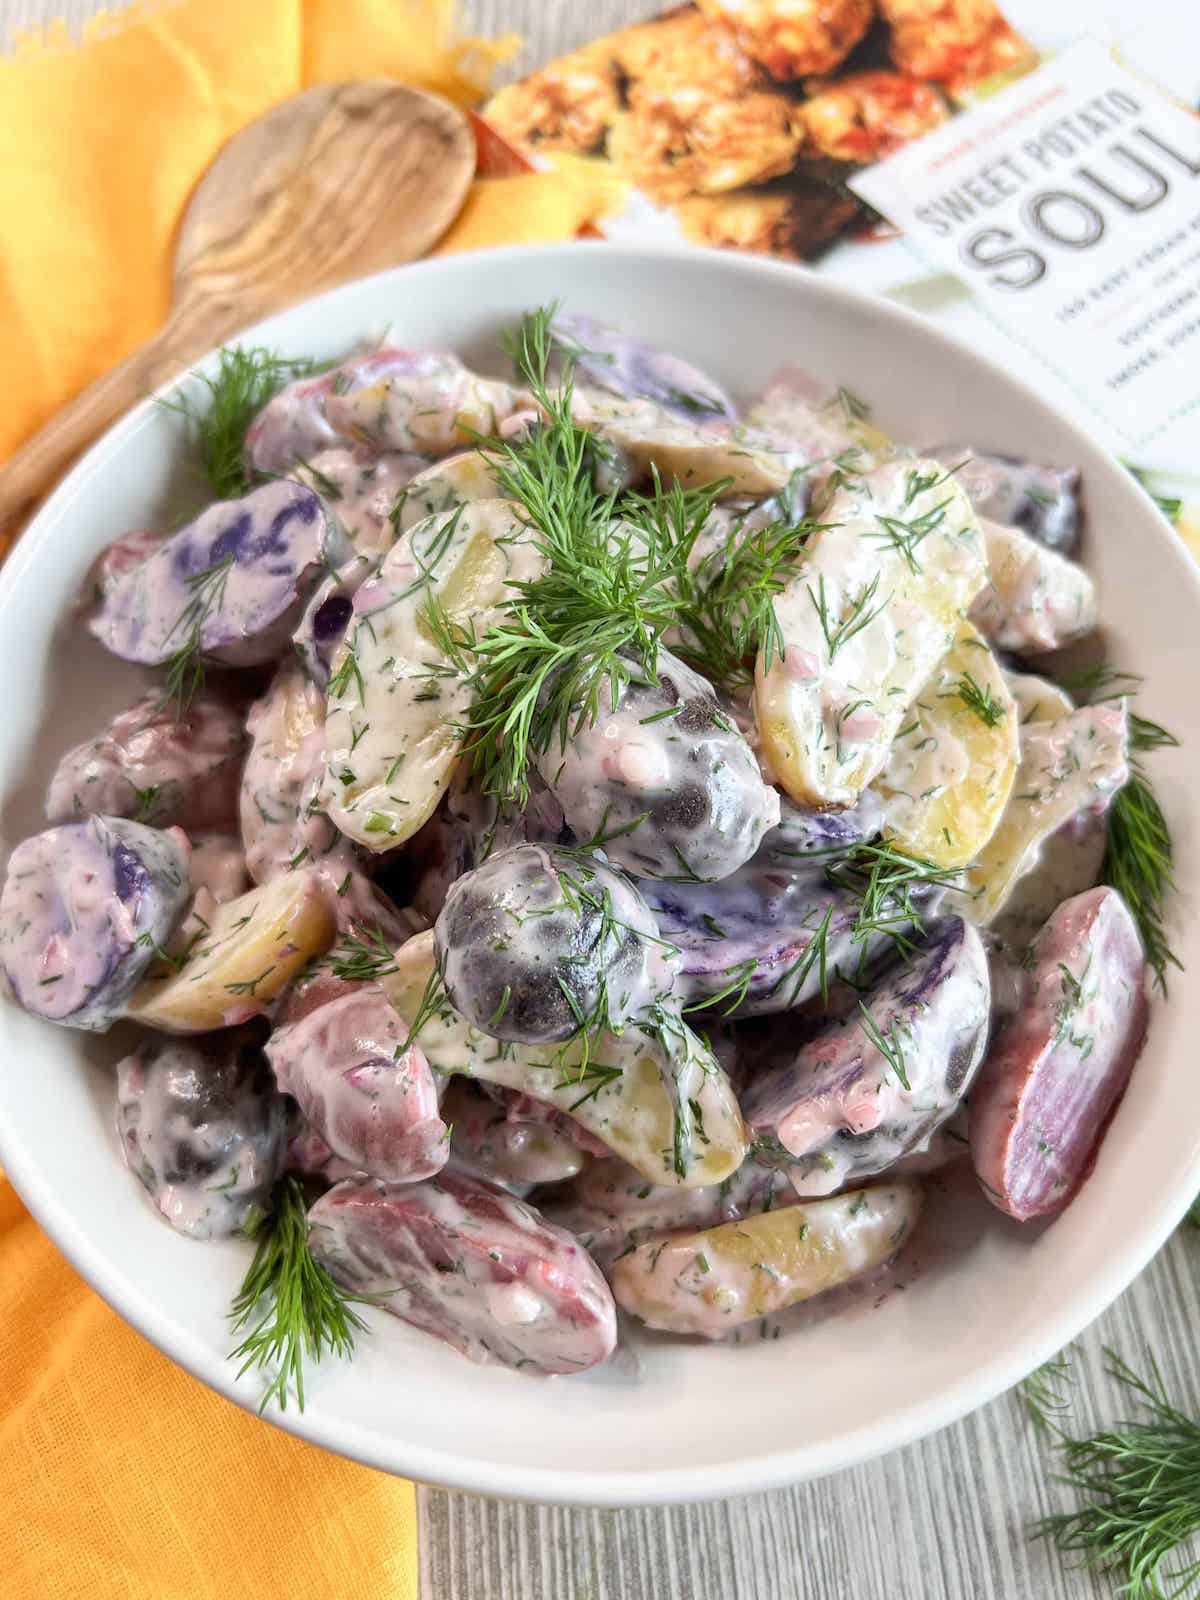 A white bowl full of purple and white potato salad garnished wish sprigs of fresh dill.